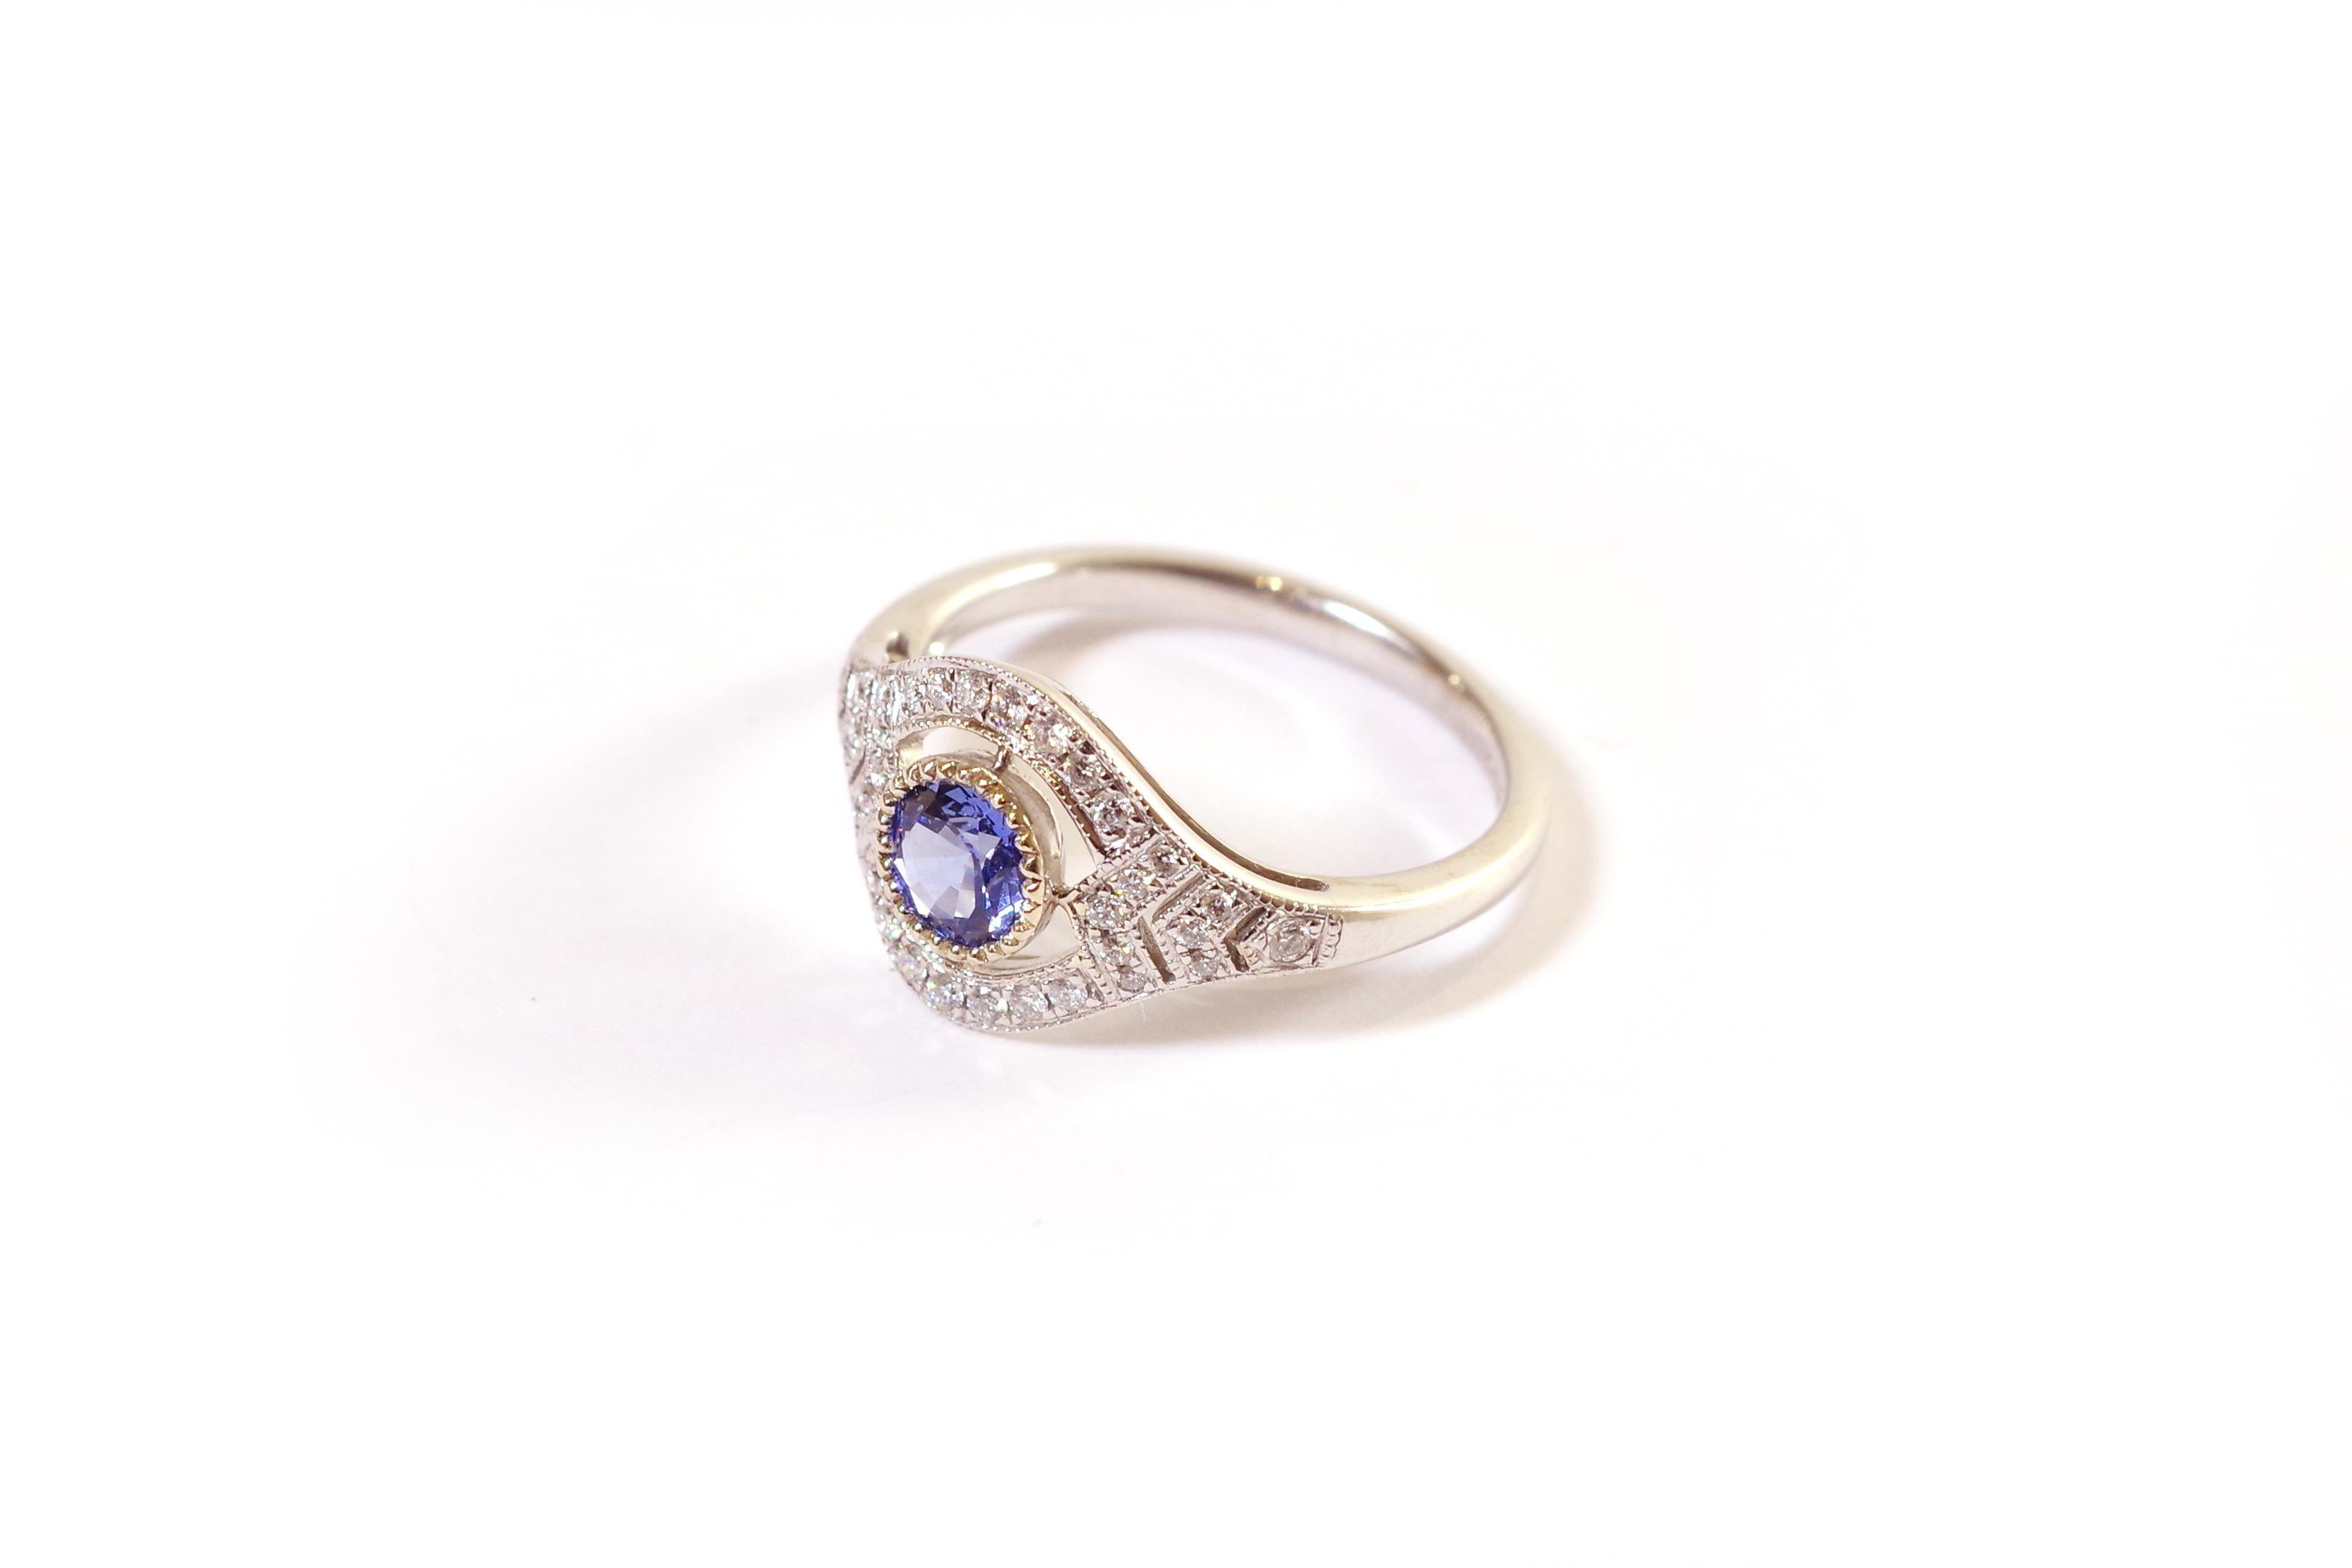 Art Deco style sapphire ring in white gold 18 karats. English ring with a circular openwork main motif, set with a round sapphire. The central sapphire is surrounded by two semi-circles of fourteen brilliant-cut diamonds. The shoulders are adorned